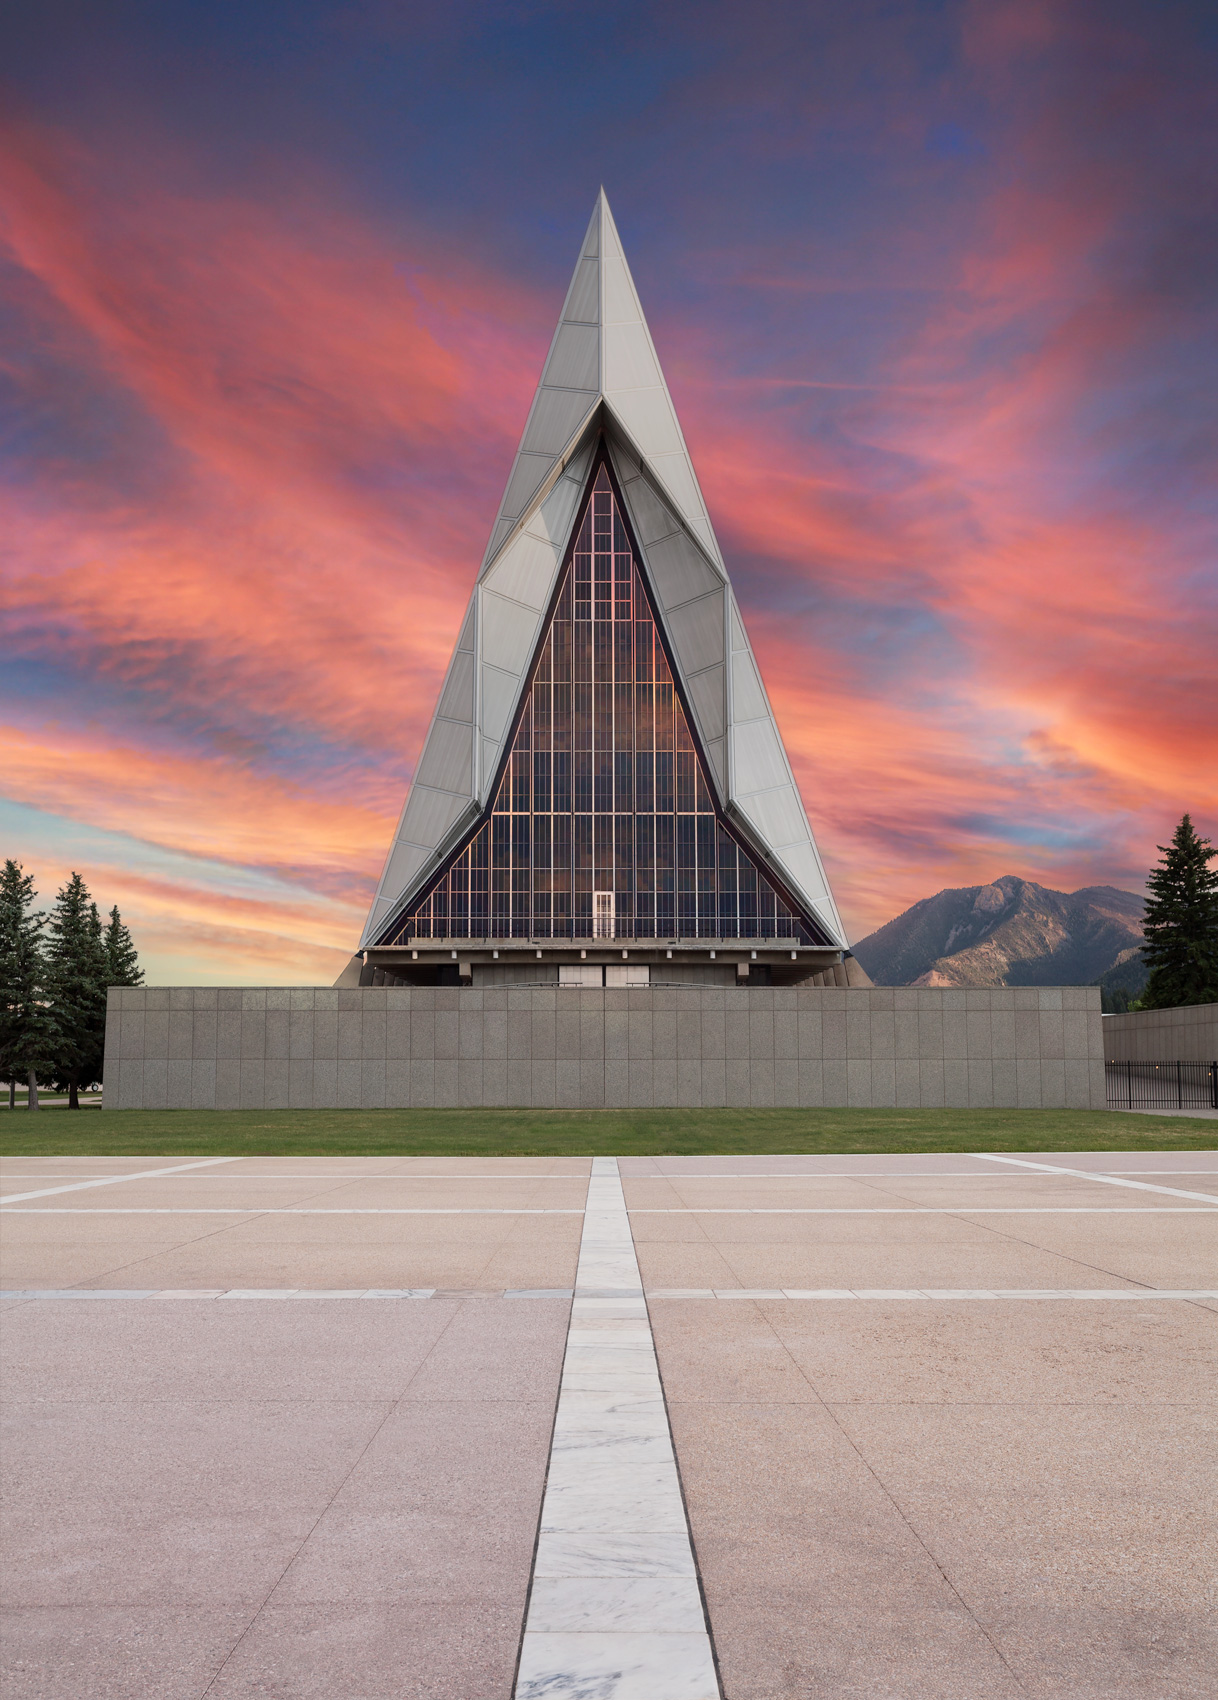 The Cadet Chapel at the U.S. Air Force Academy in Colorado